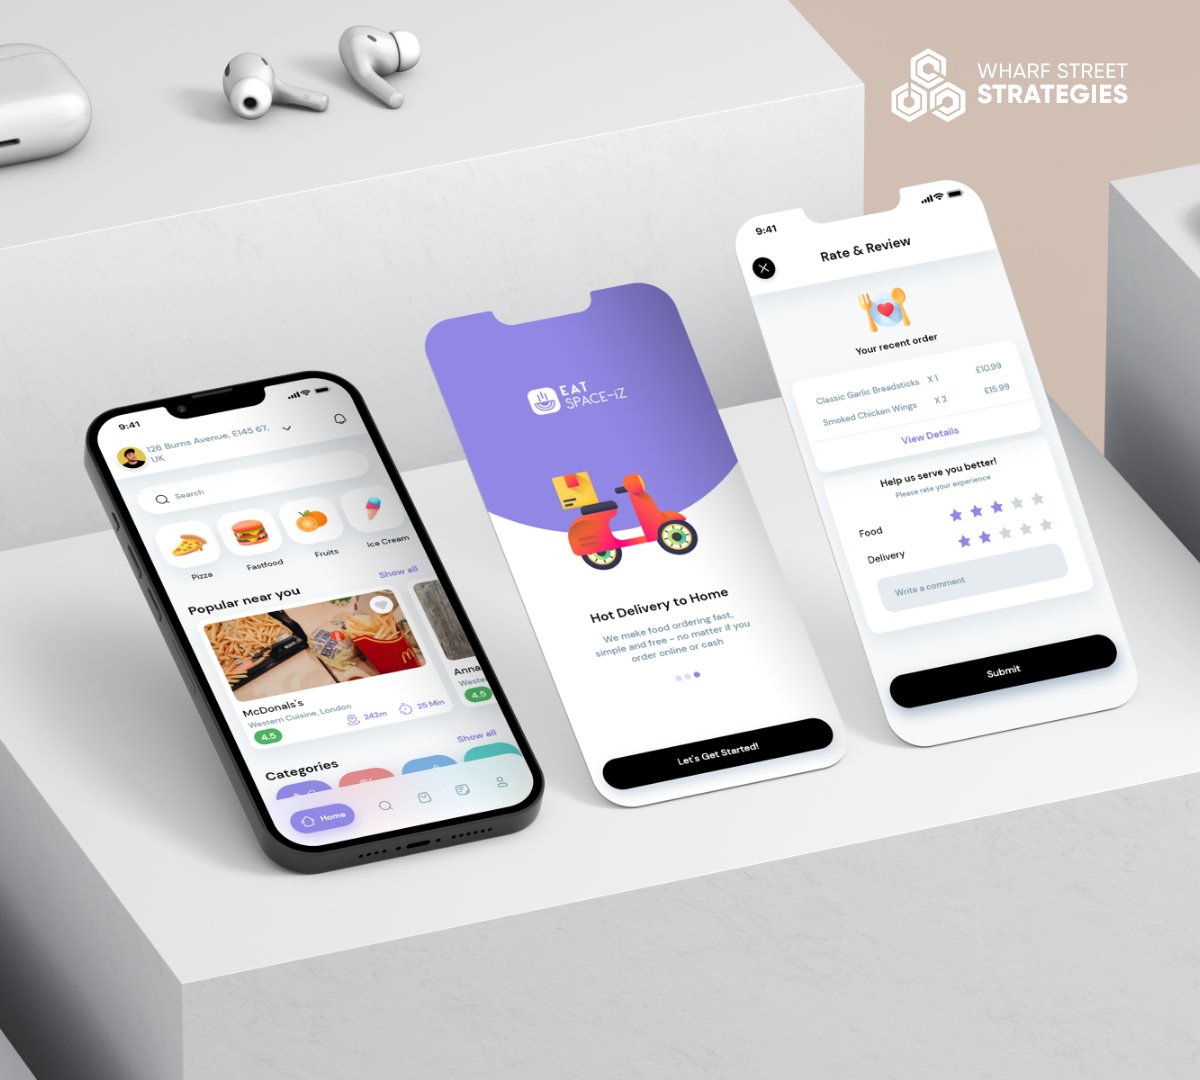 Mobile App UI/UX design | Onboarding | Home | Review The design brings content into focus; design makes function visible. Contact us for more information at info@wharfstreetstrategies.com #wharfstreet #askwss #ui #ux #uidesign #uiux #uiuxdesign #uxdesign #uxdesigner #uxui